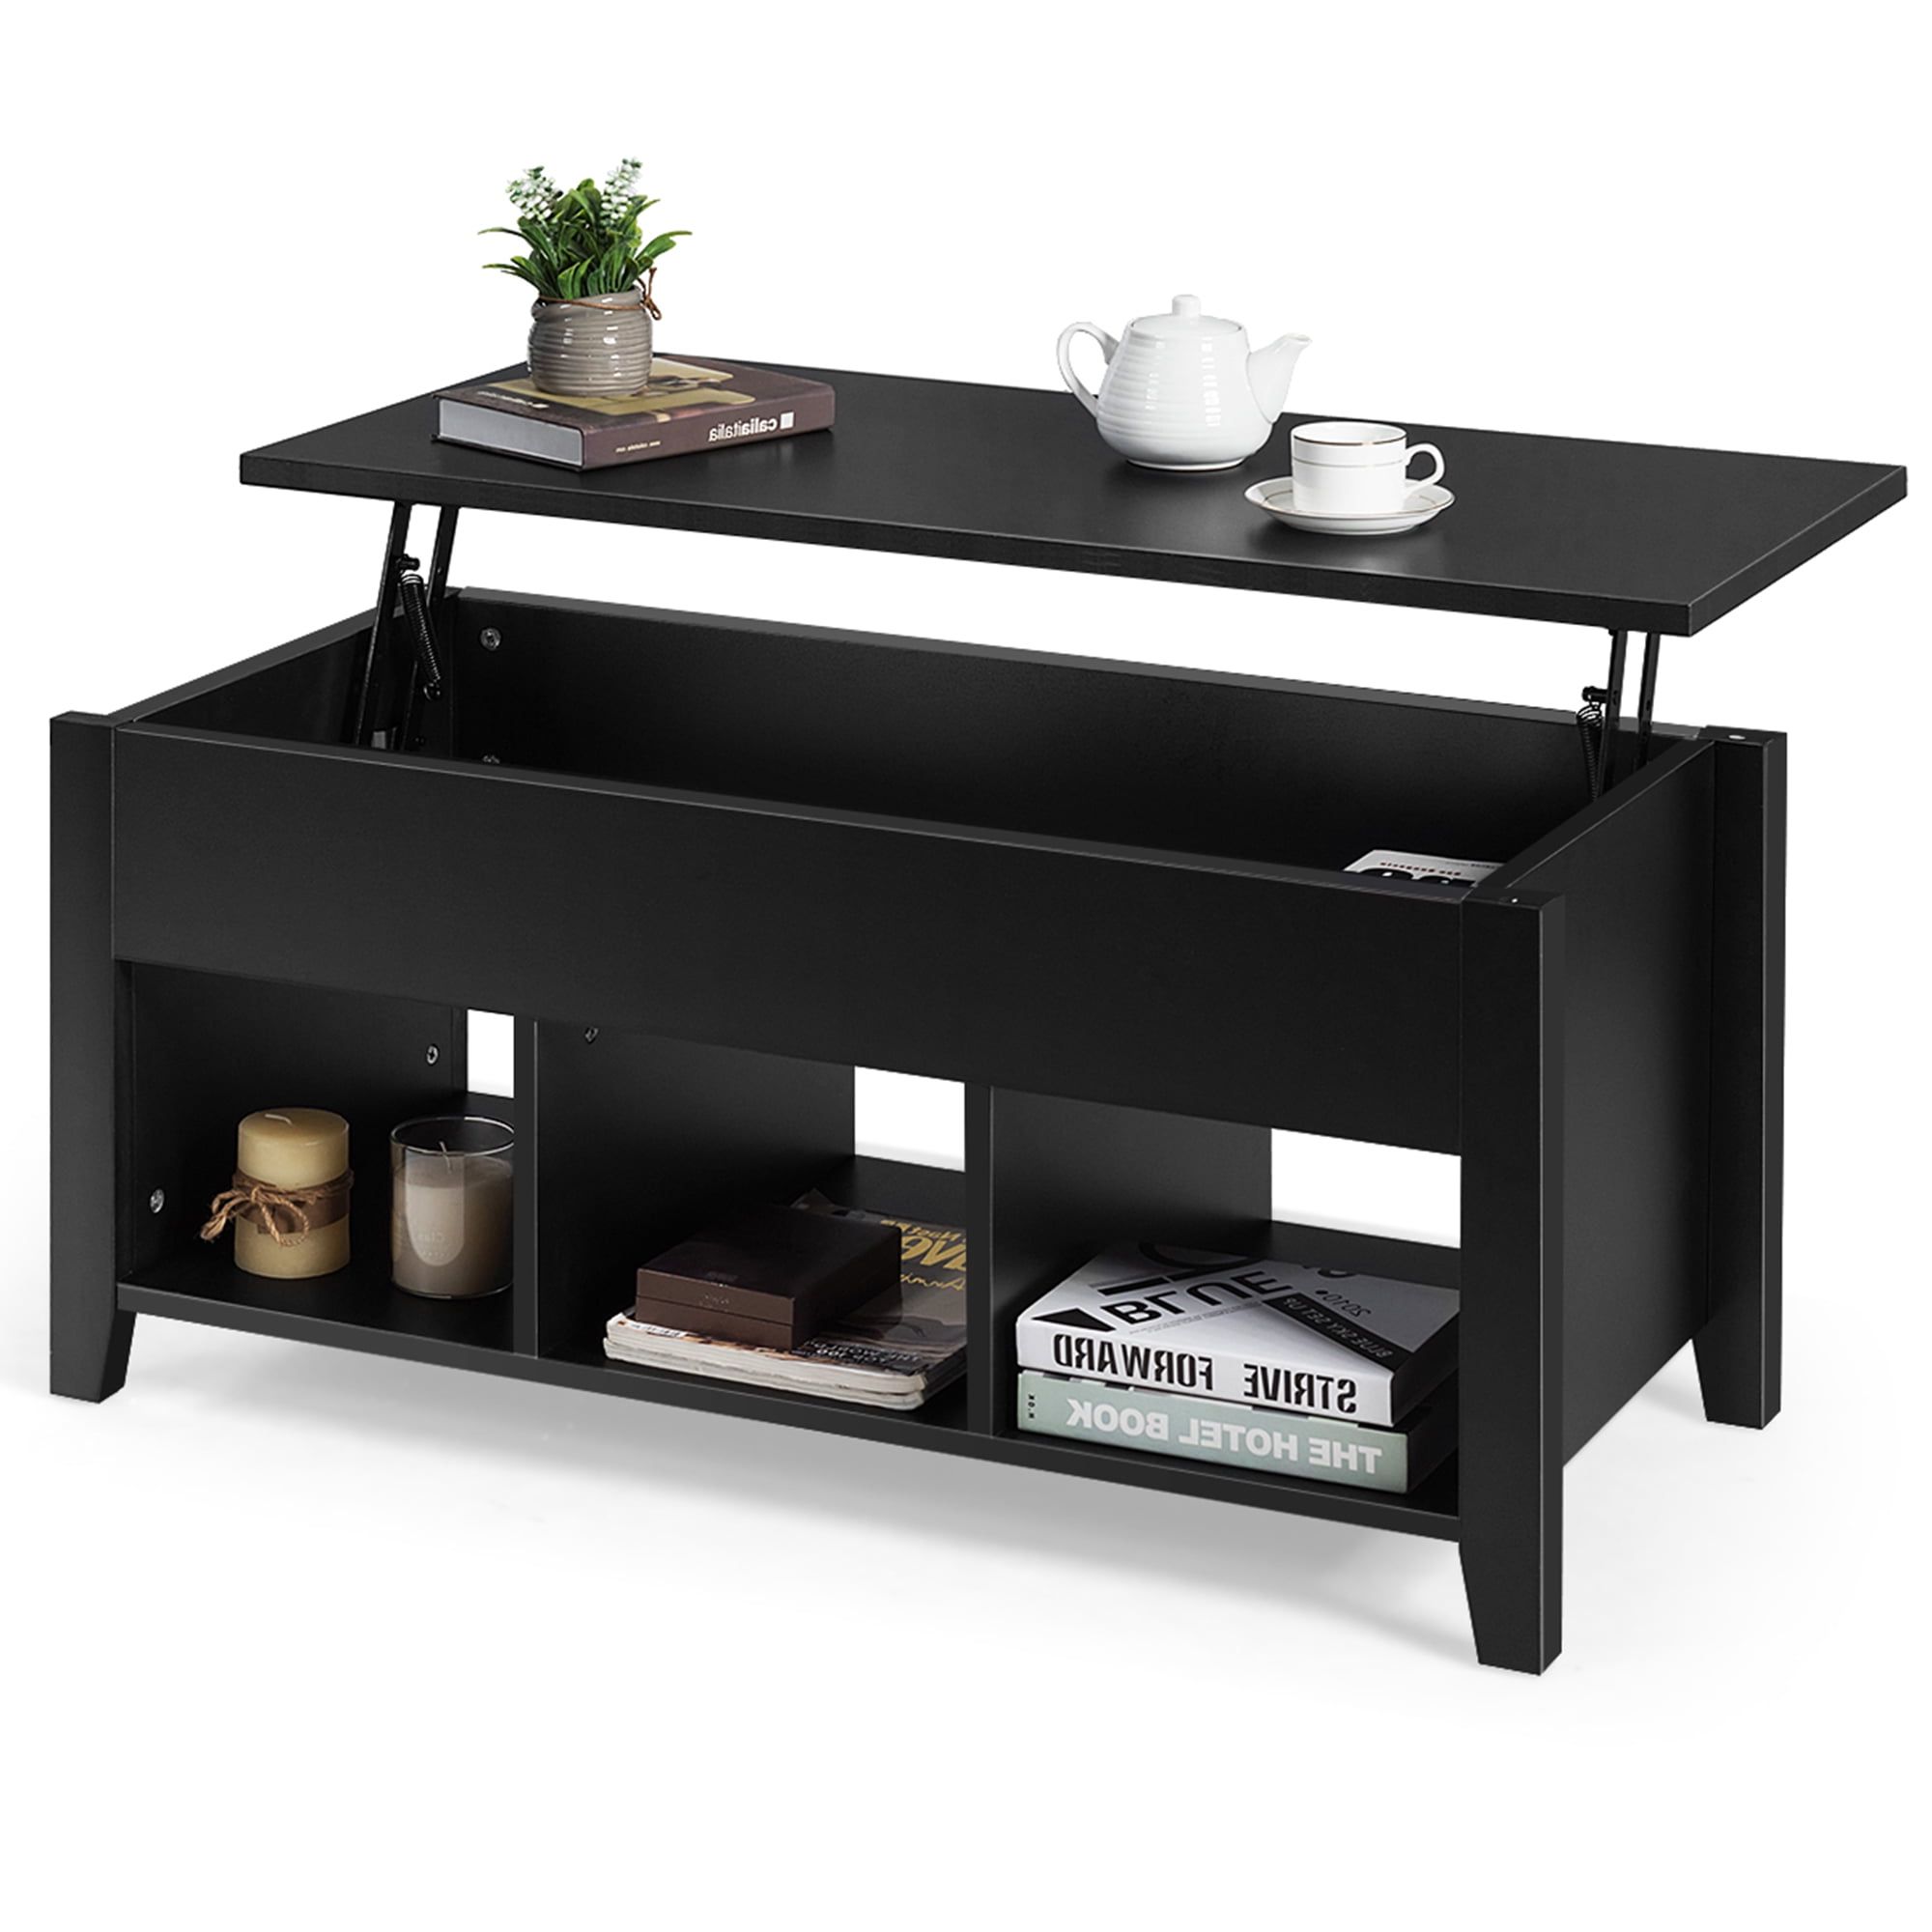 Most Recently Released Lift Top Coffee Tables With Storage With Gymax Lift Top Coffee Table W/ Storage Compartment Shelf Living Room (View 6 of 15)